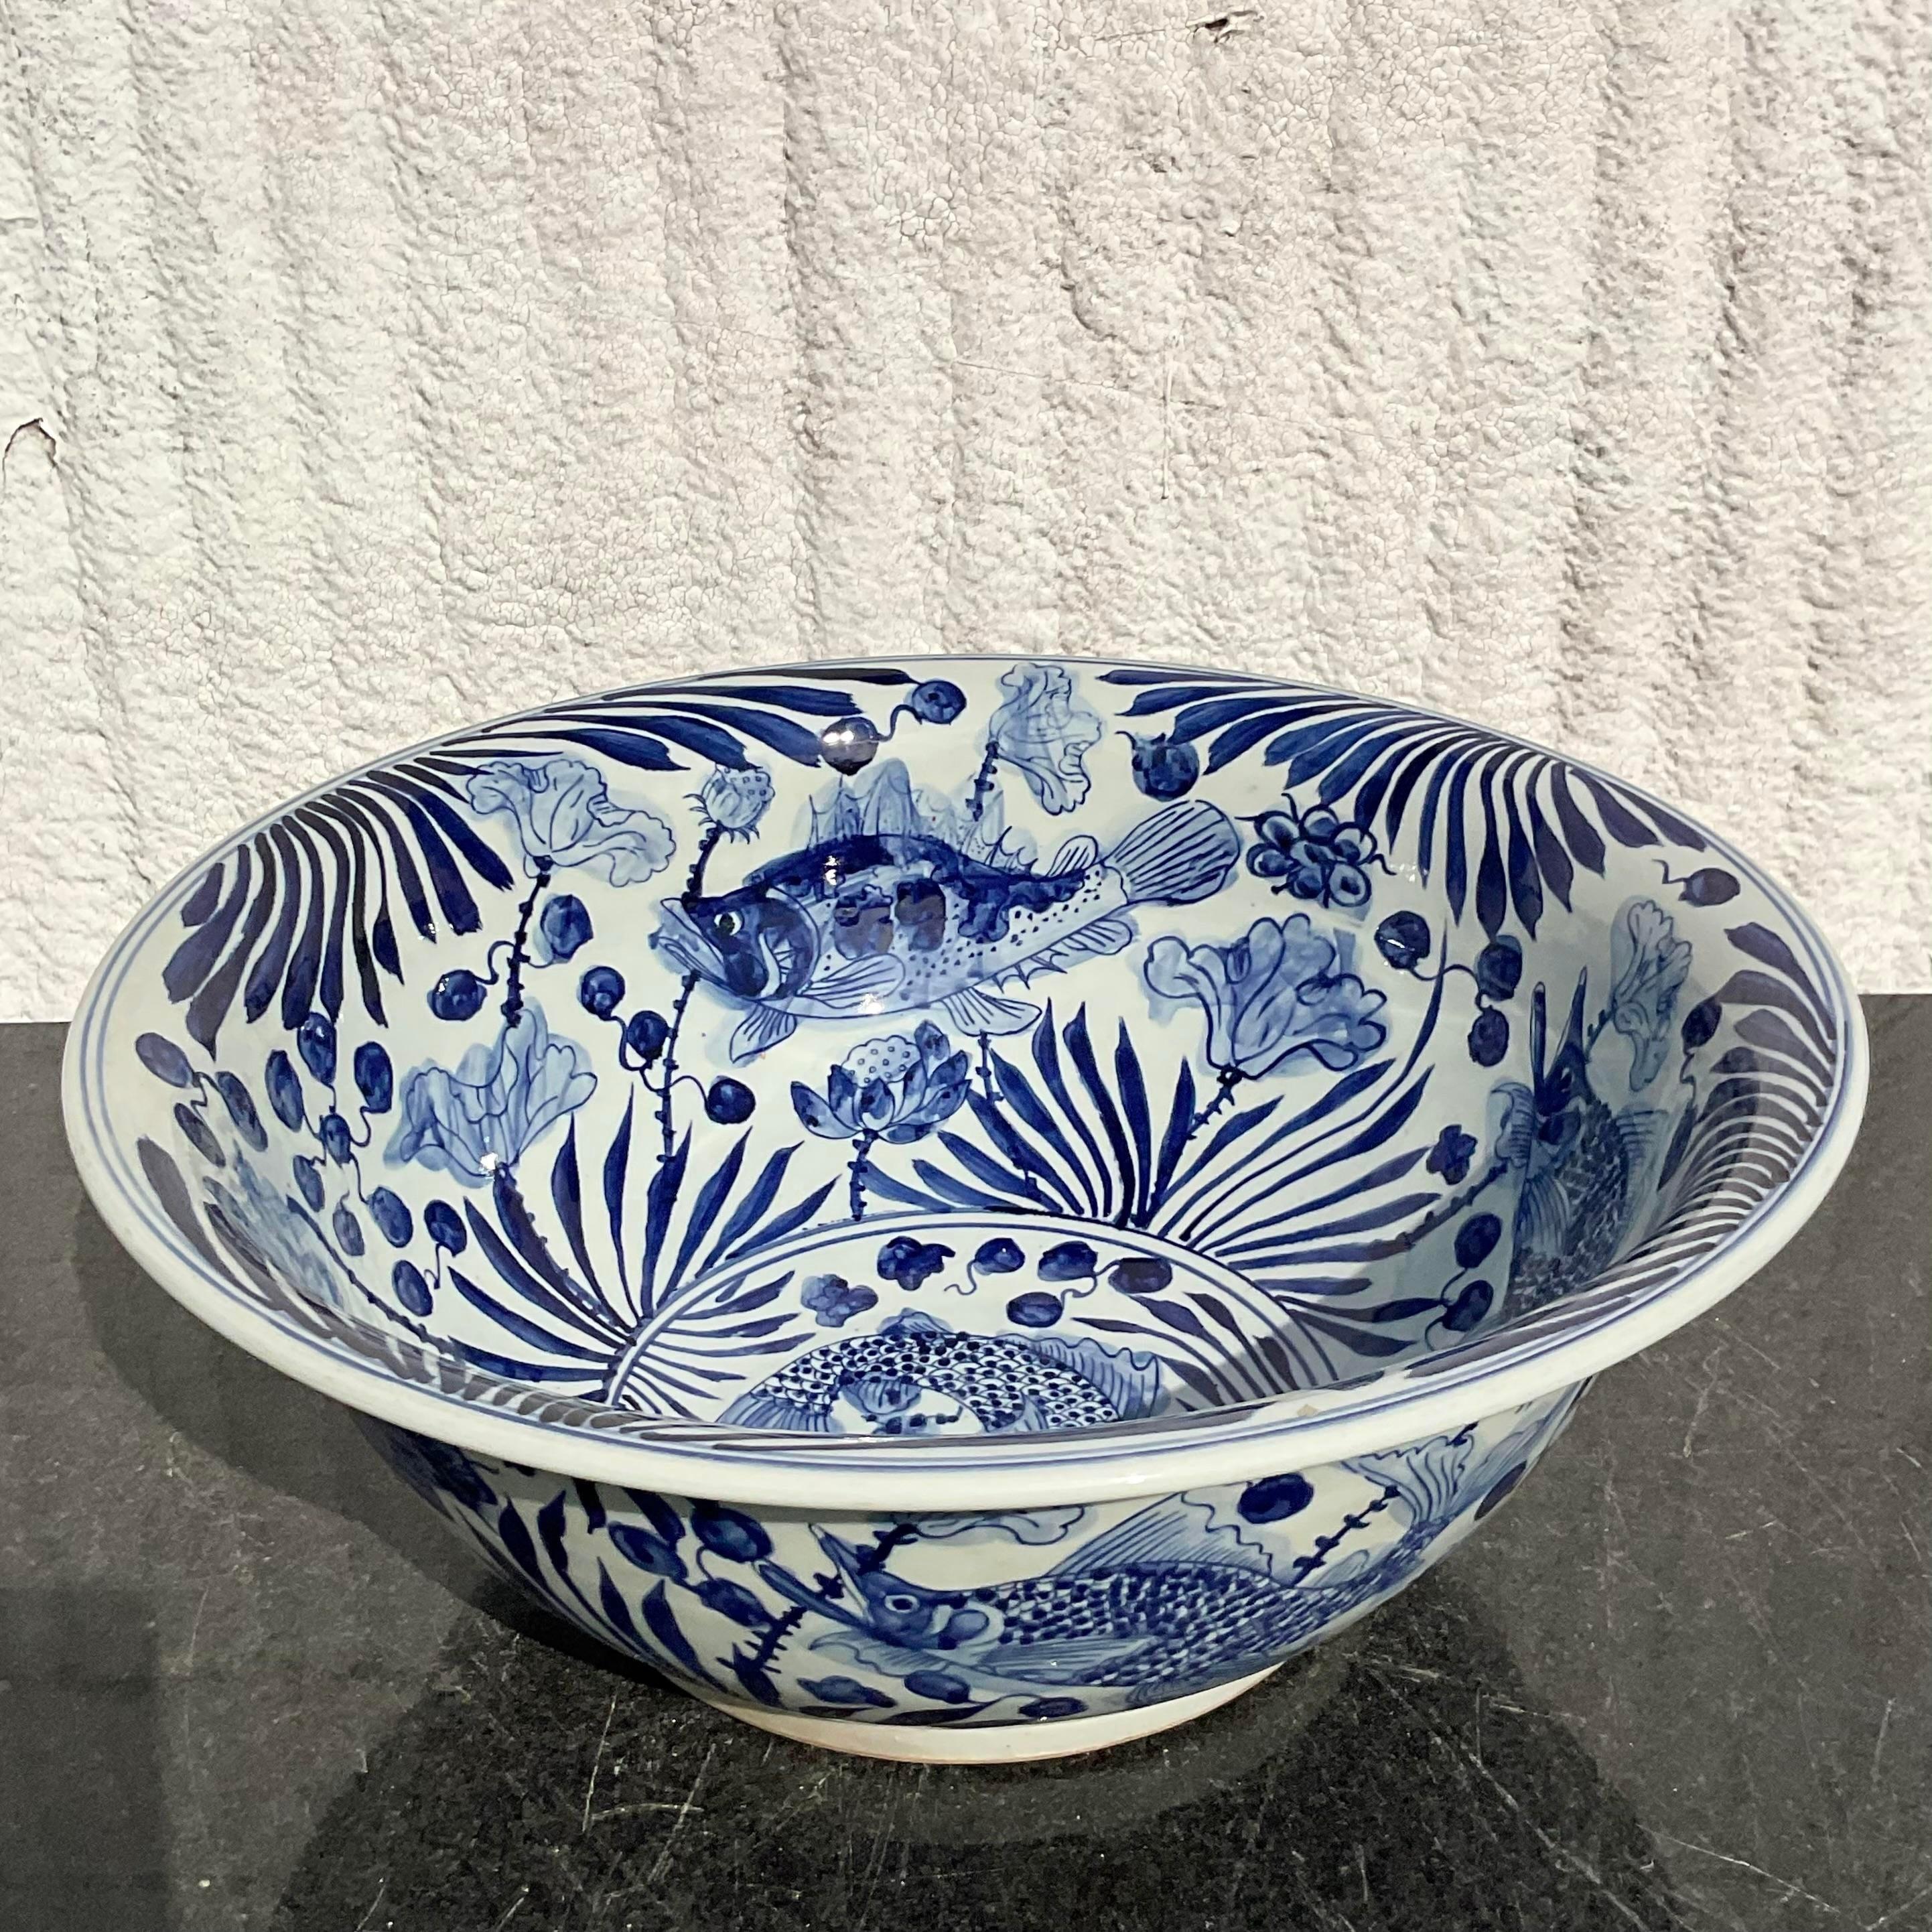 Japanese Vintage Asian Blue and White Fish Centerpiece Bowl